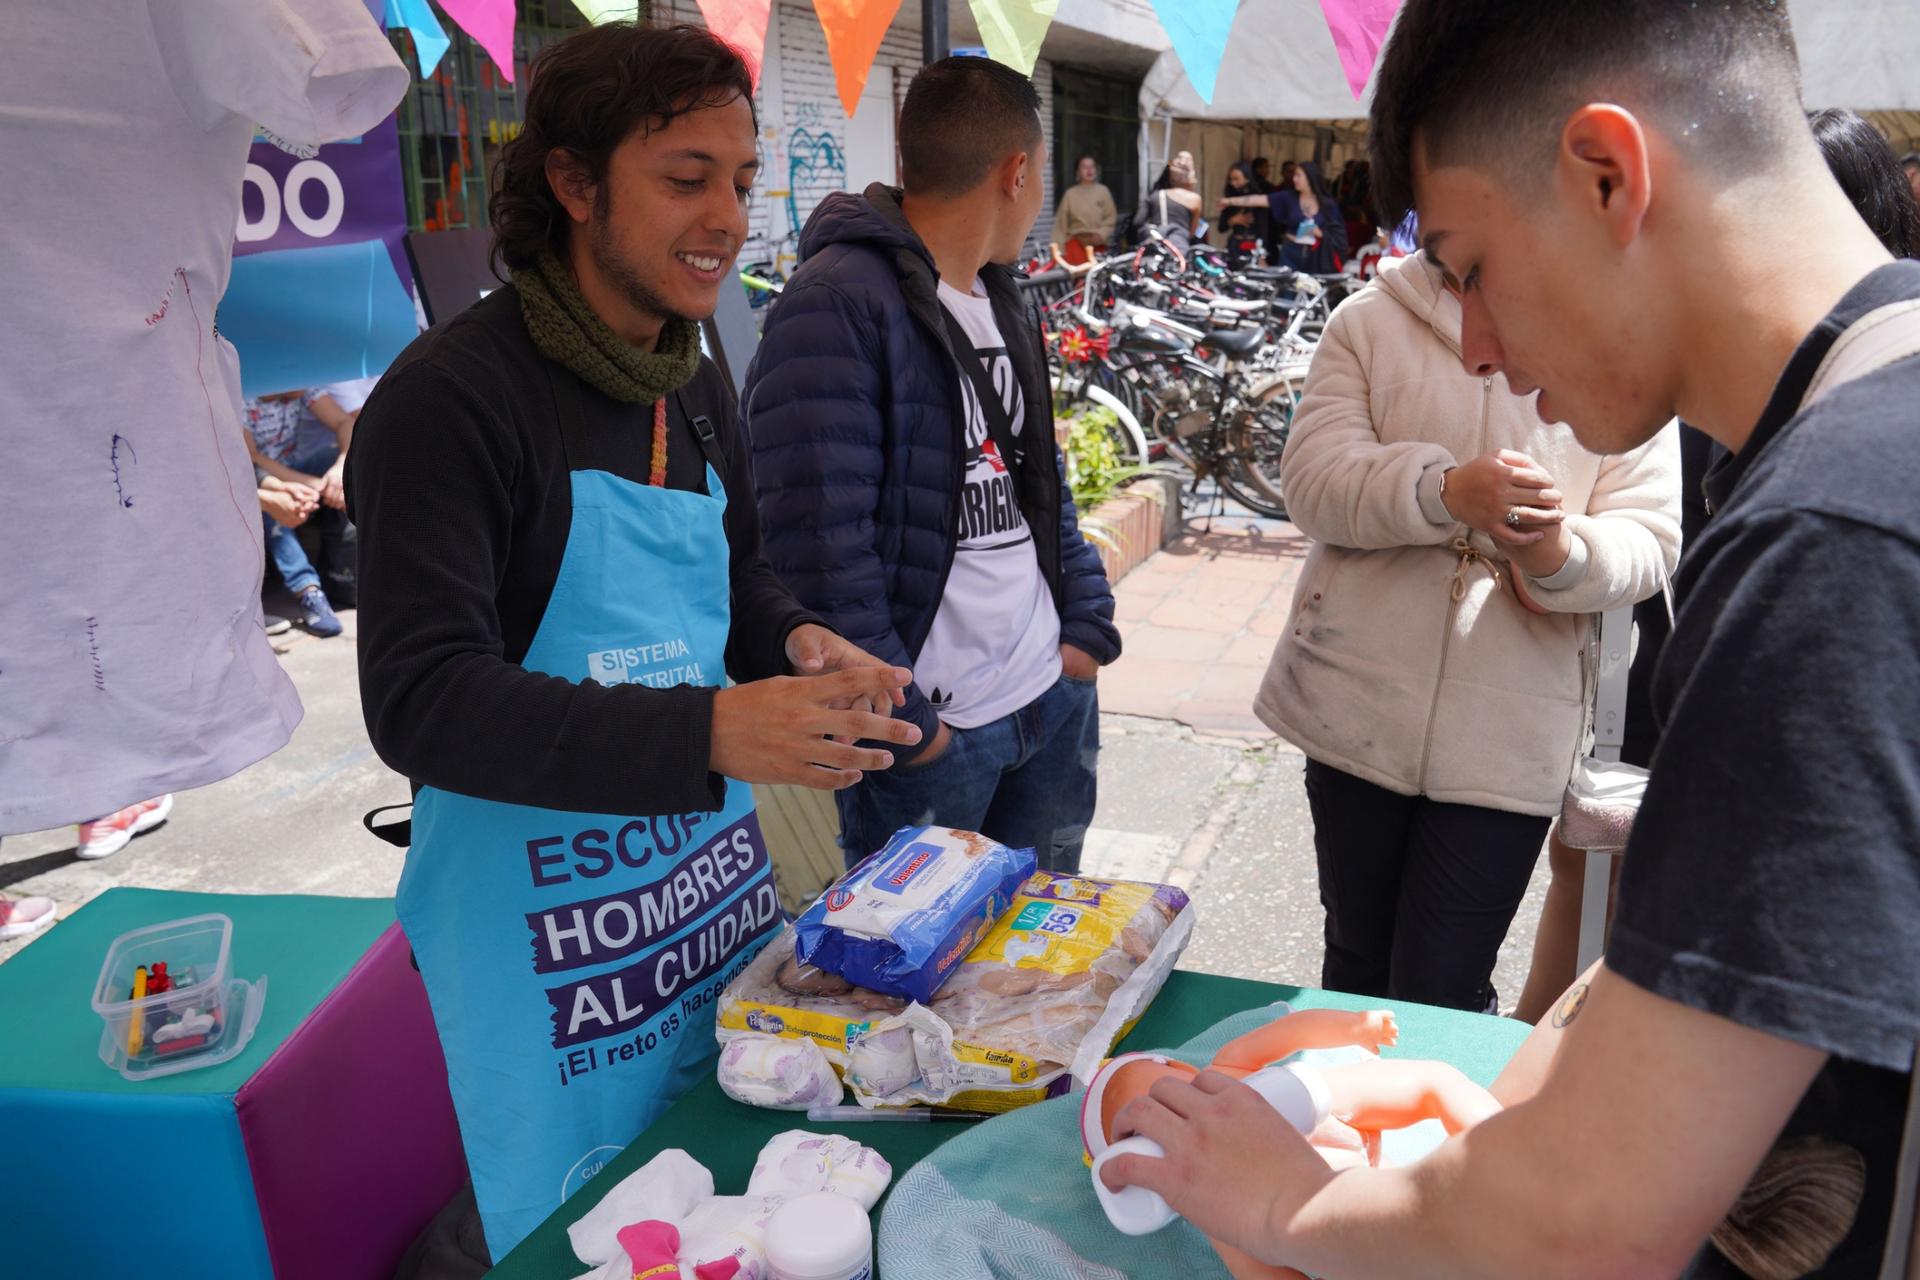 At a job fair in Bogotá, Nicolas Londoño showed groups of young men how to change a baby's diapers.  